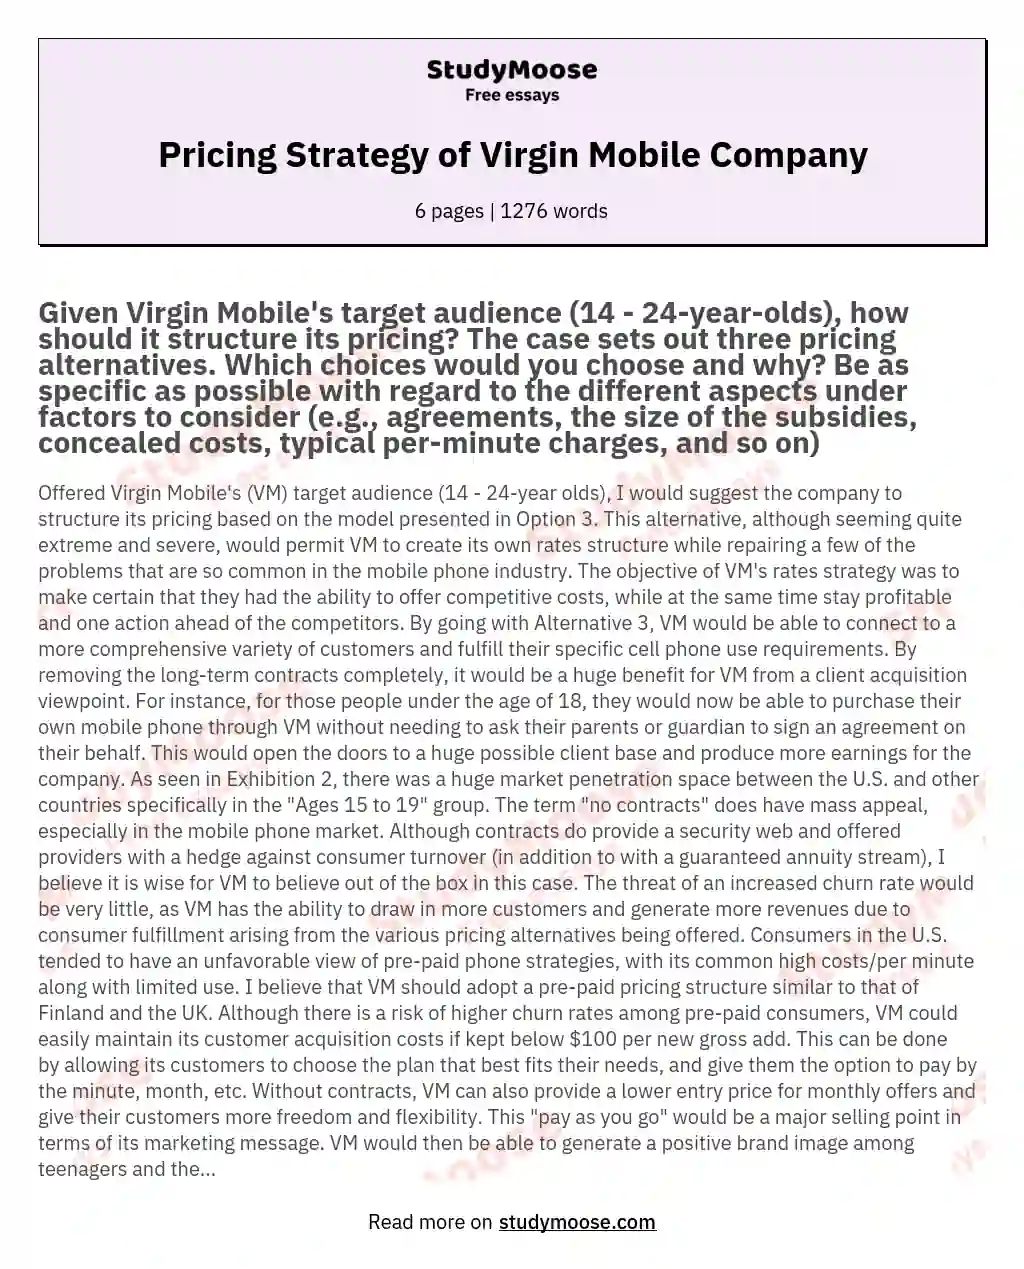 Pricing Strategy of Virgin Mobile Company essay